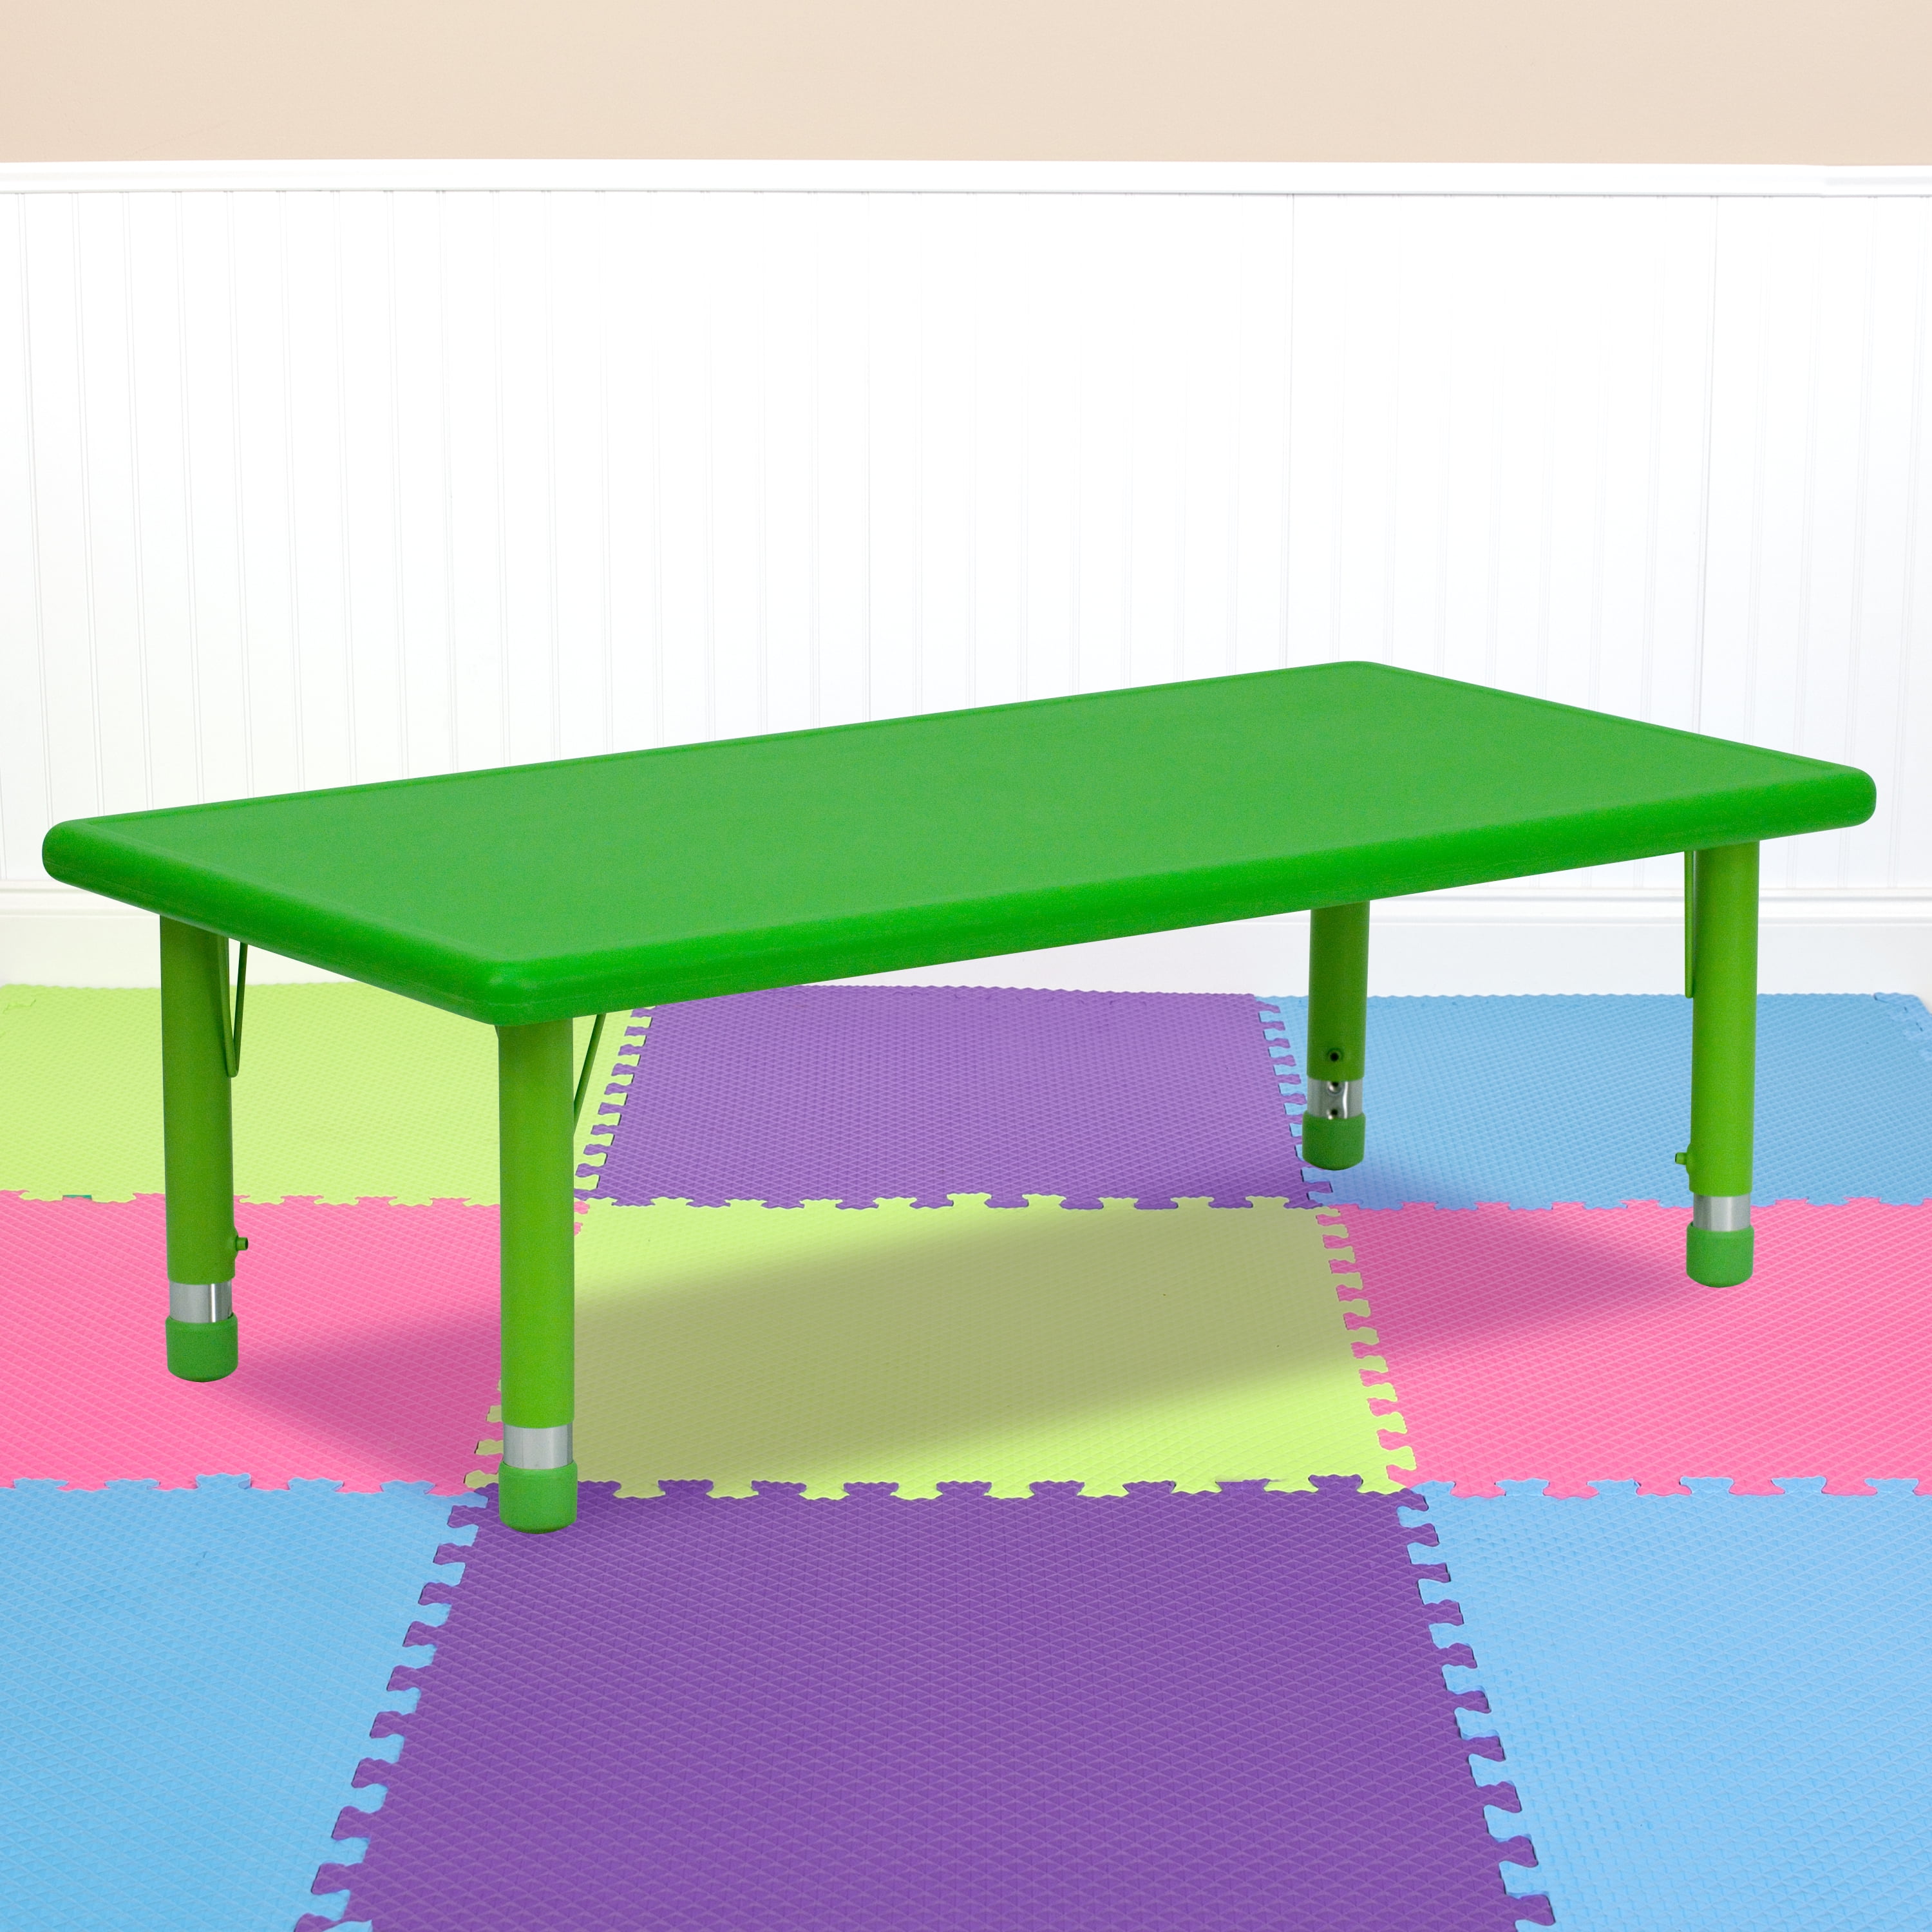 Berries Mobile Horseshoe Activity Table with Wood Top - 60W x 66L